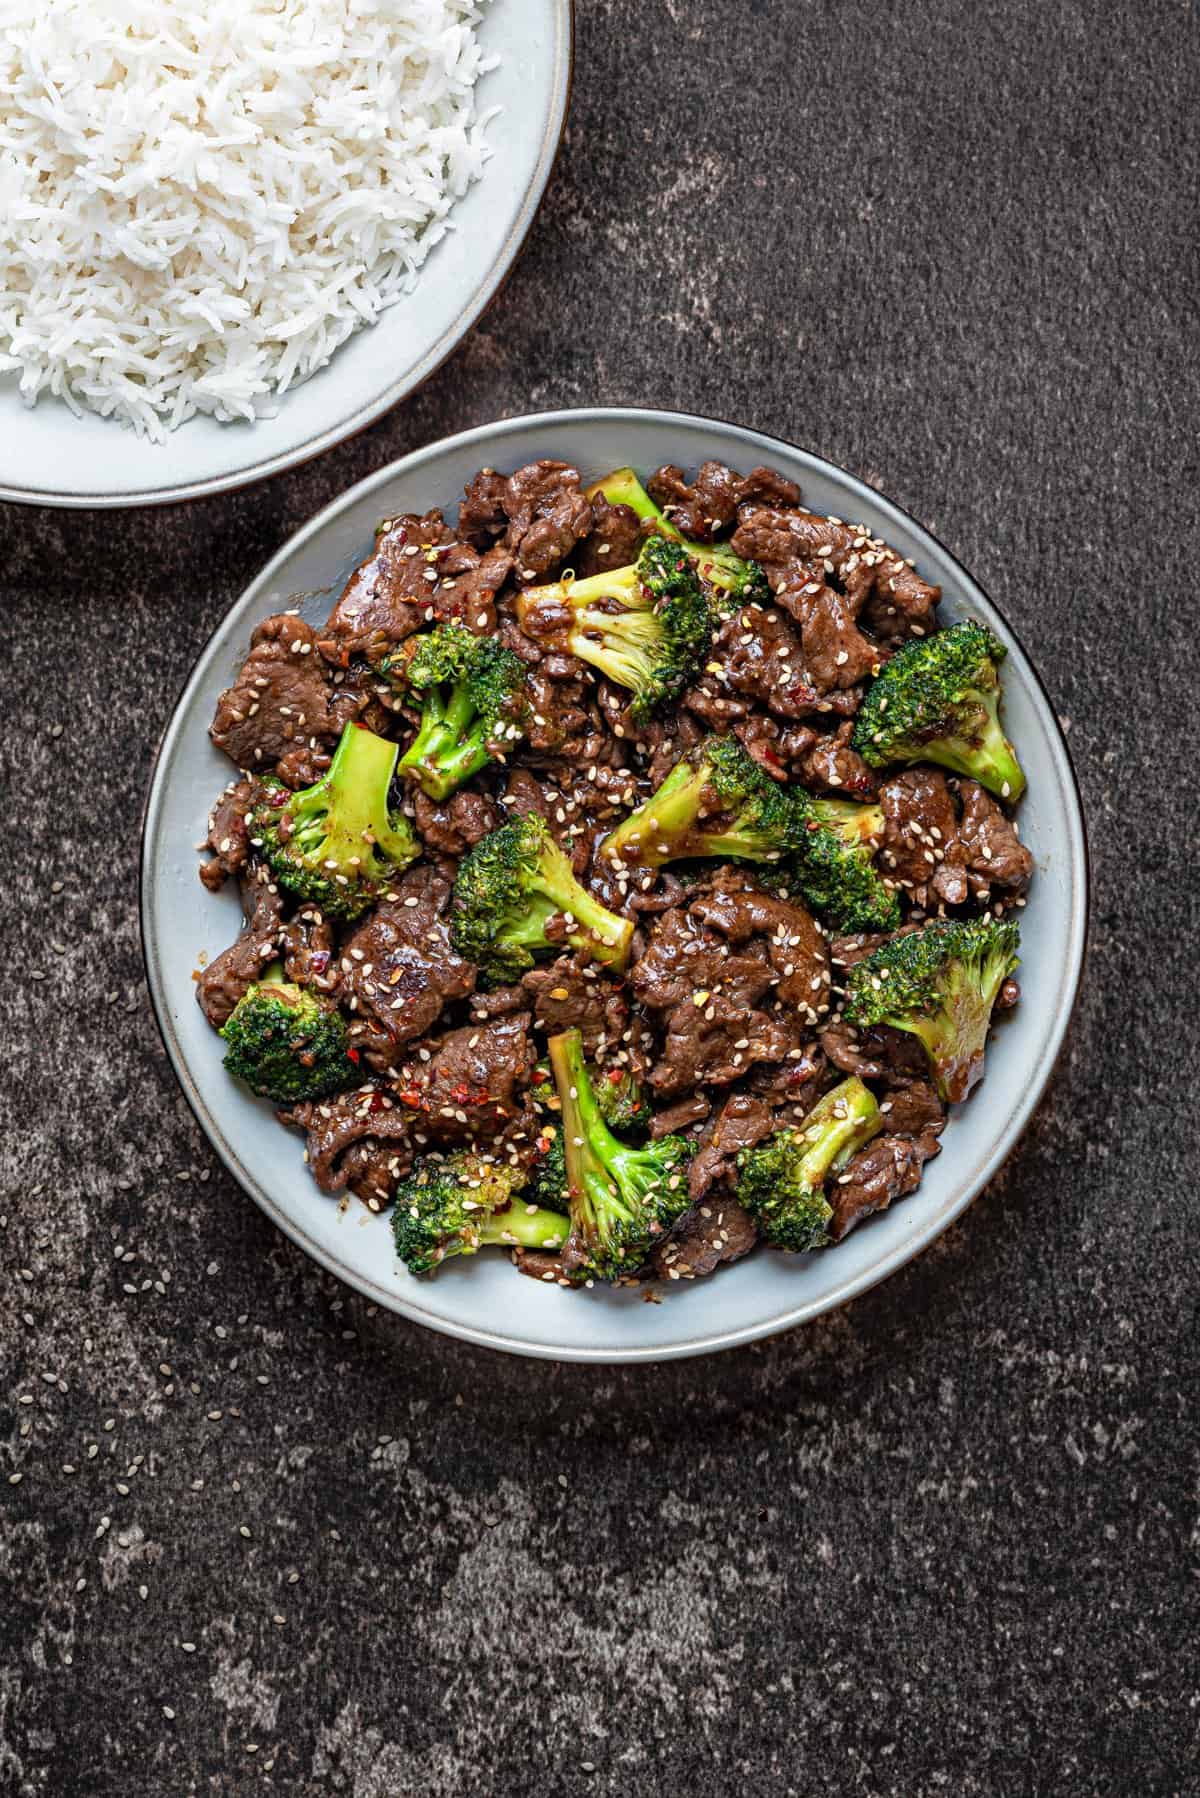 beef and broccoli in a grey bowl topped with red chili flakes and sesame seeds.